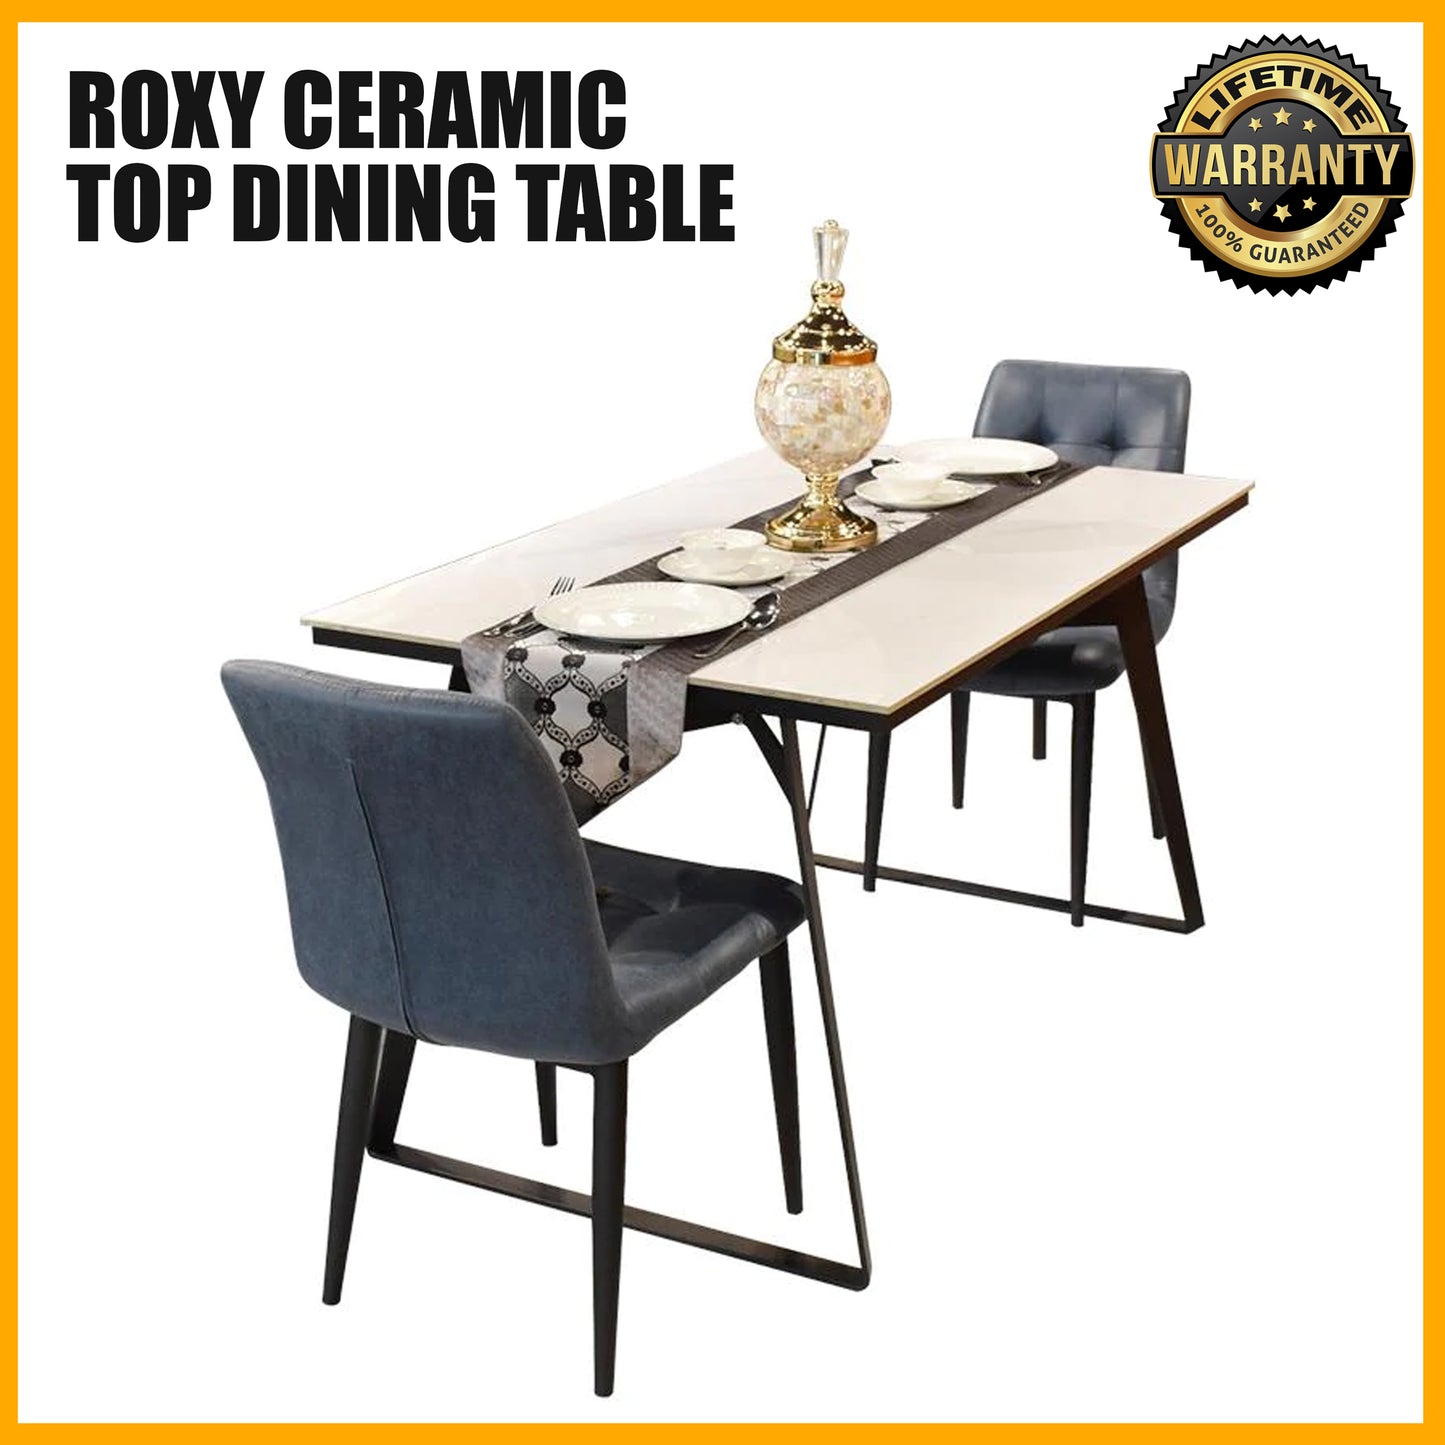 SMARTBED | ROXY CERAMIC TOP DINING TABLE